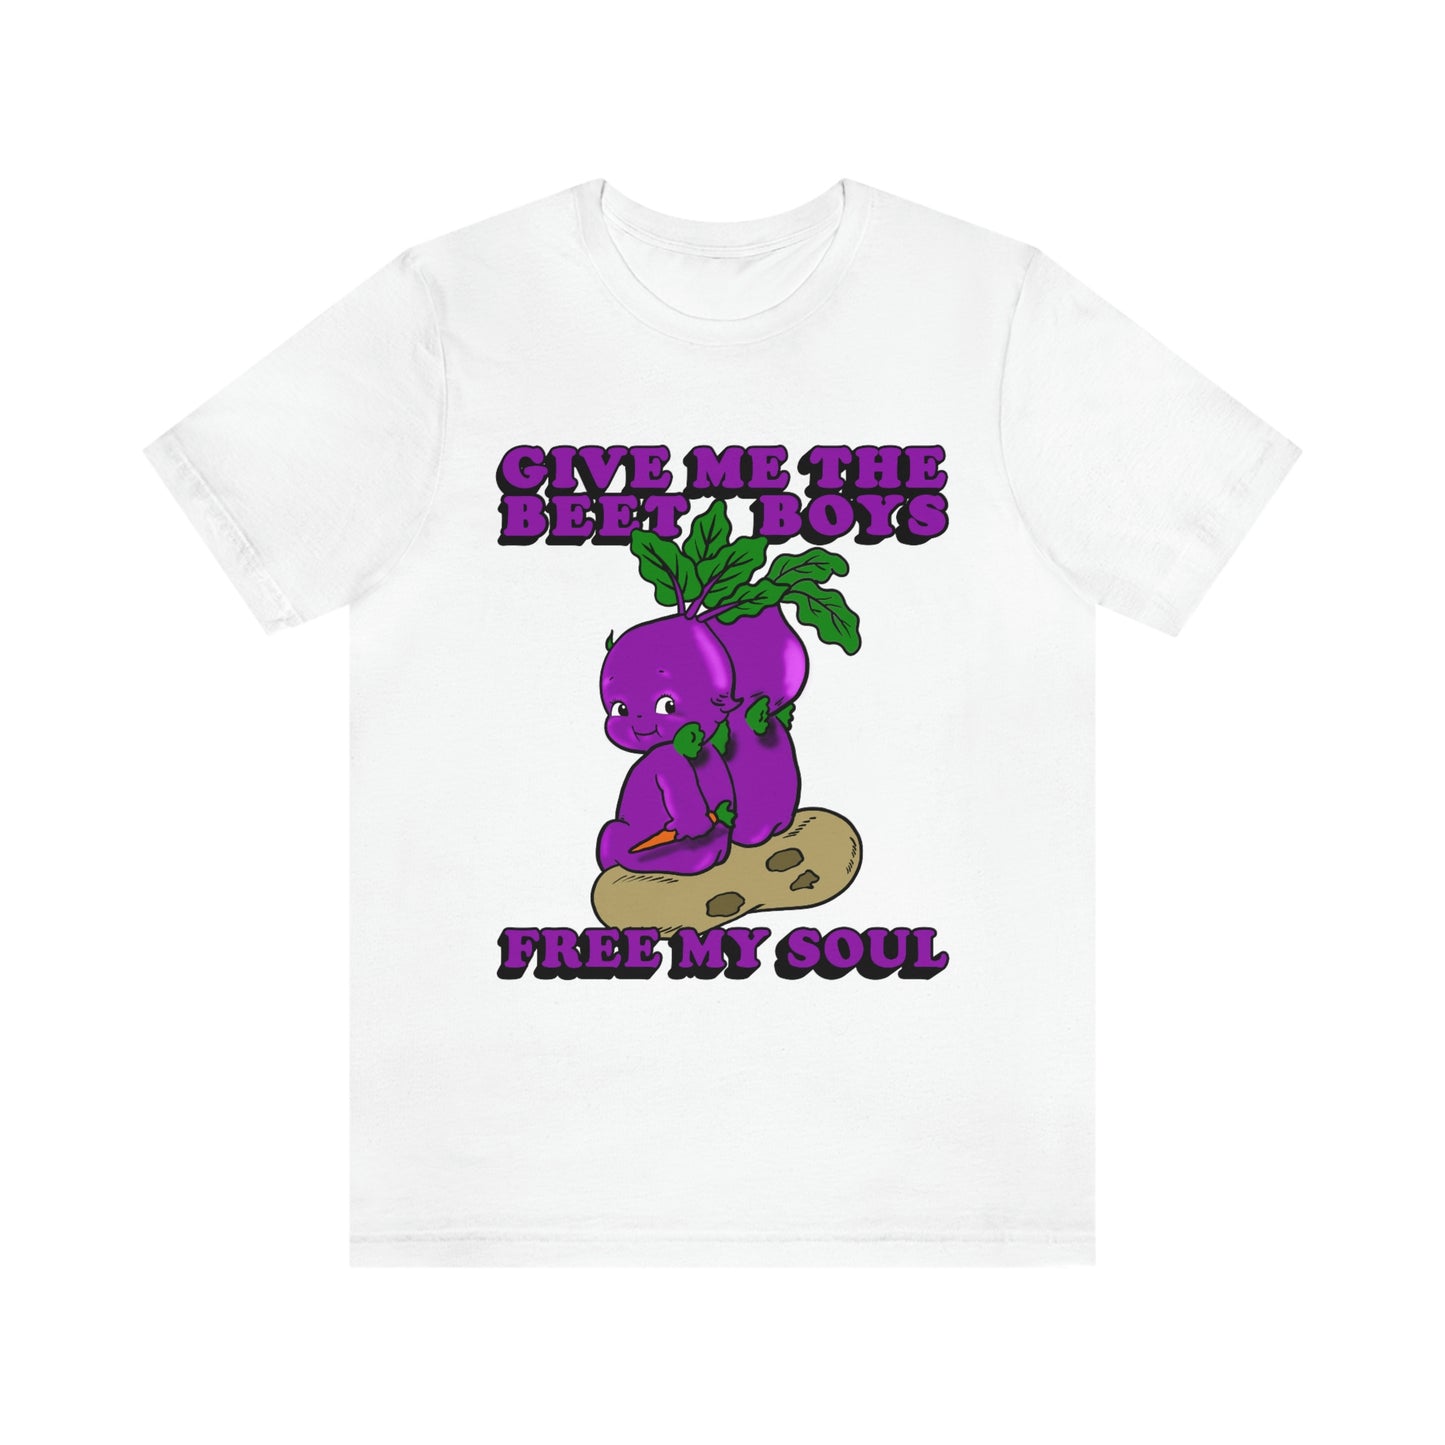 Give Me The Beet Boys And Free My Soul.